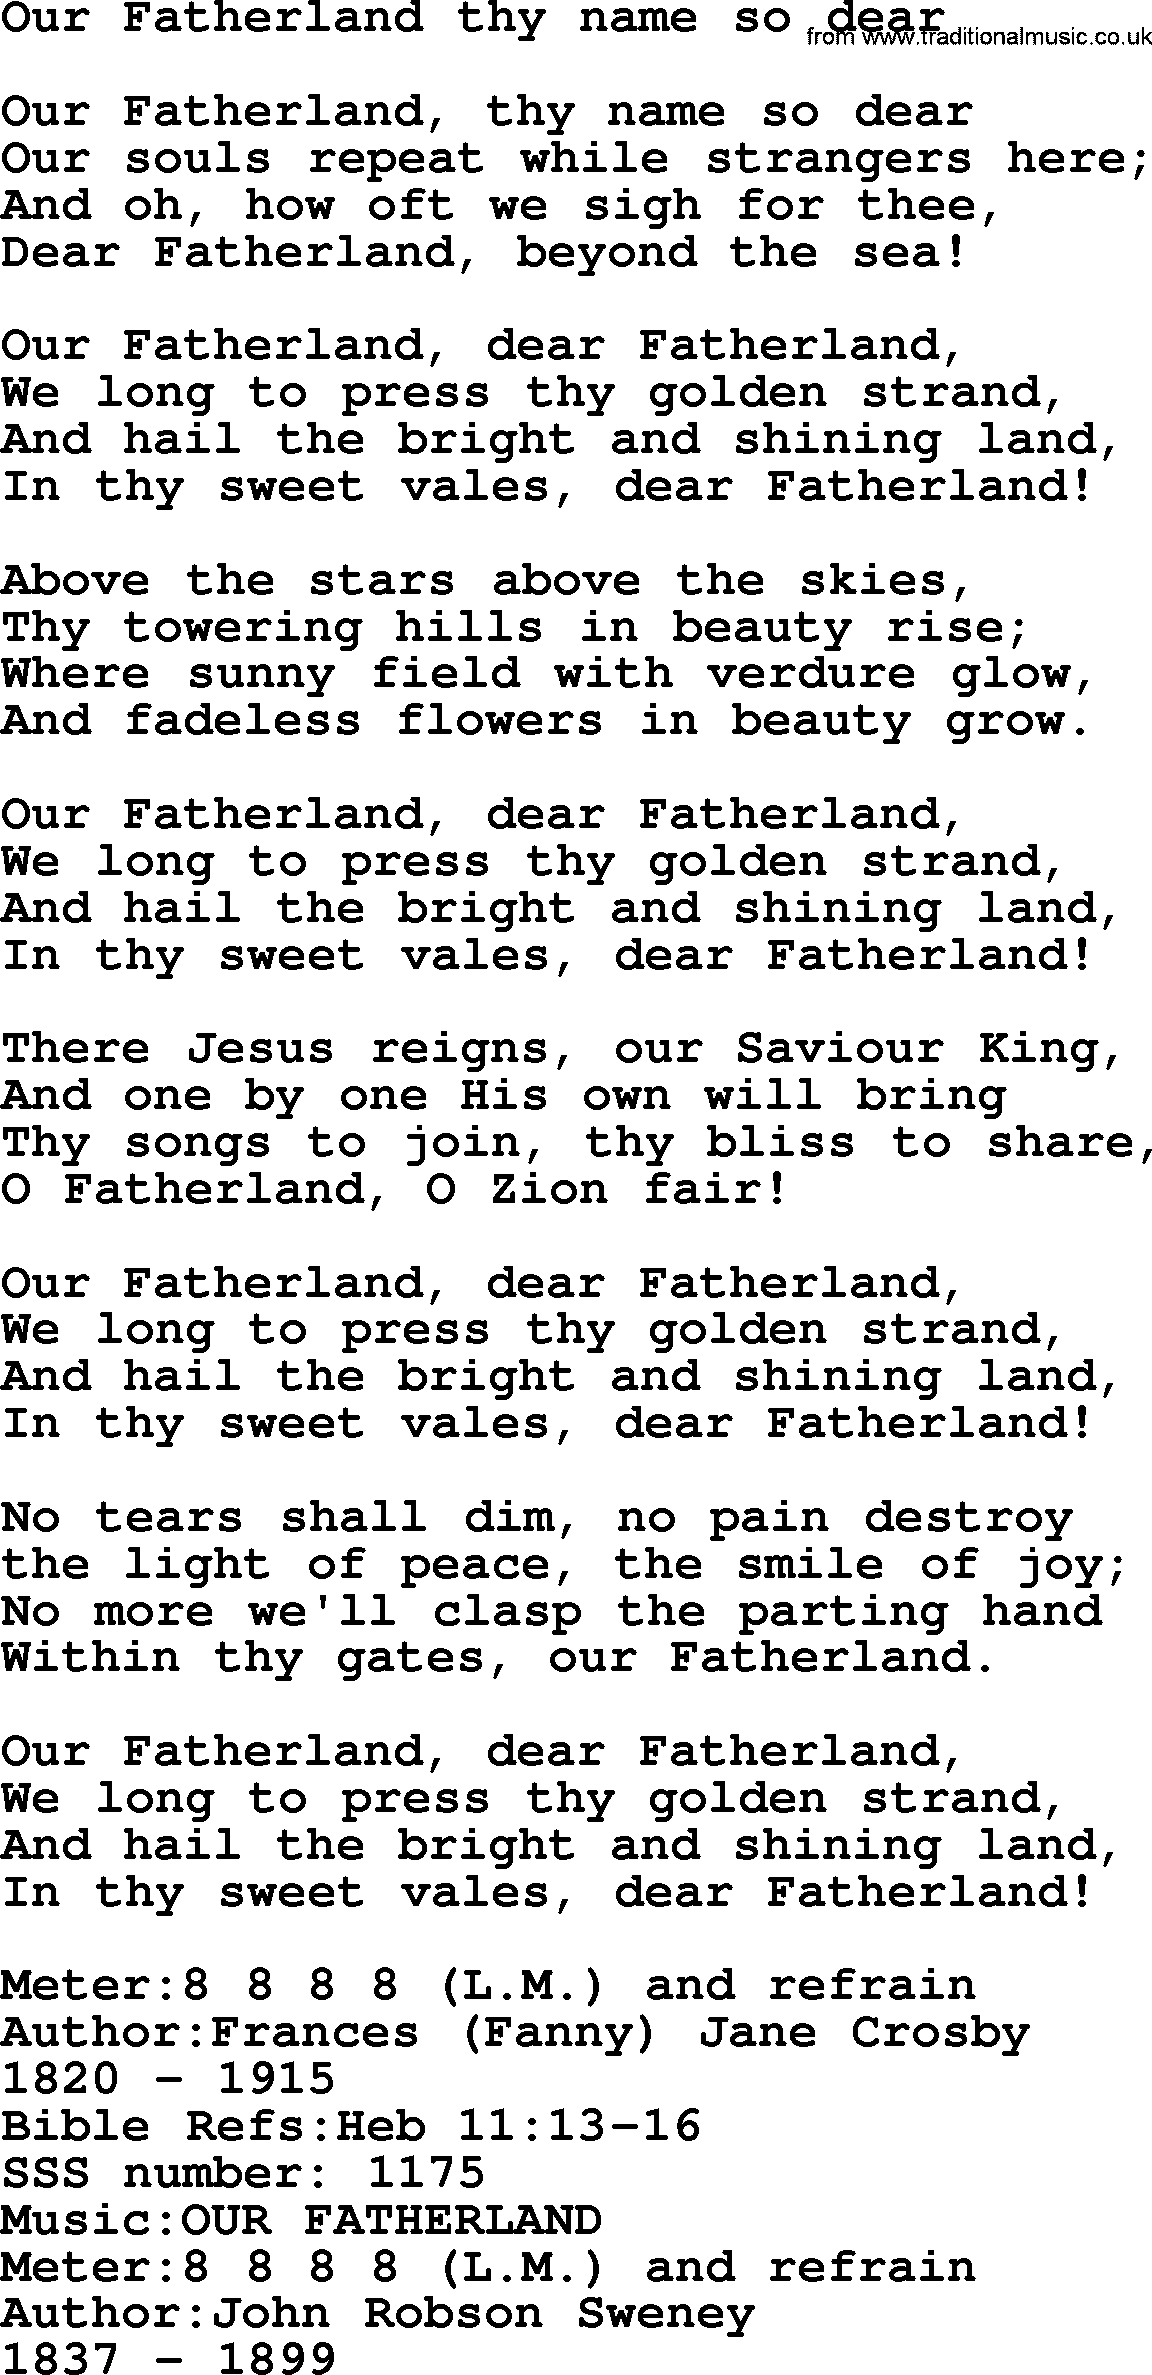 Sacred Songs and Solos complete, 1200 Hymns, title: Our Fatherland Thy Name So Dear, lyrics and PDF